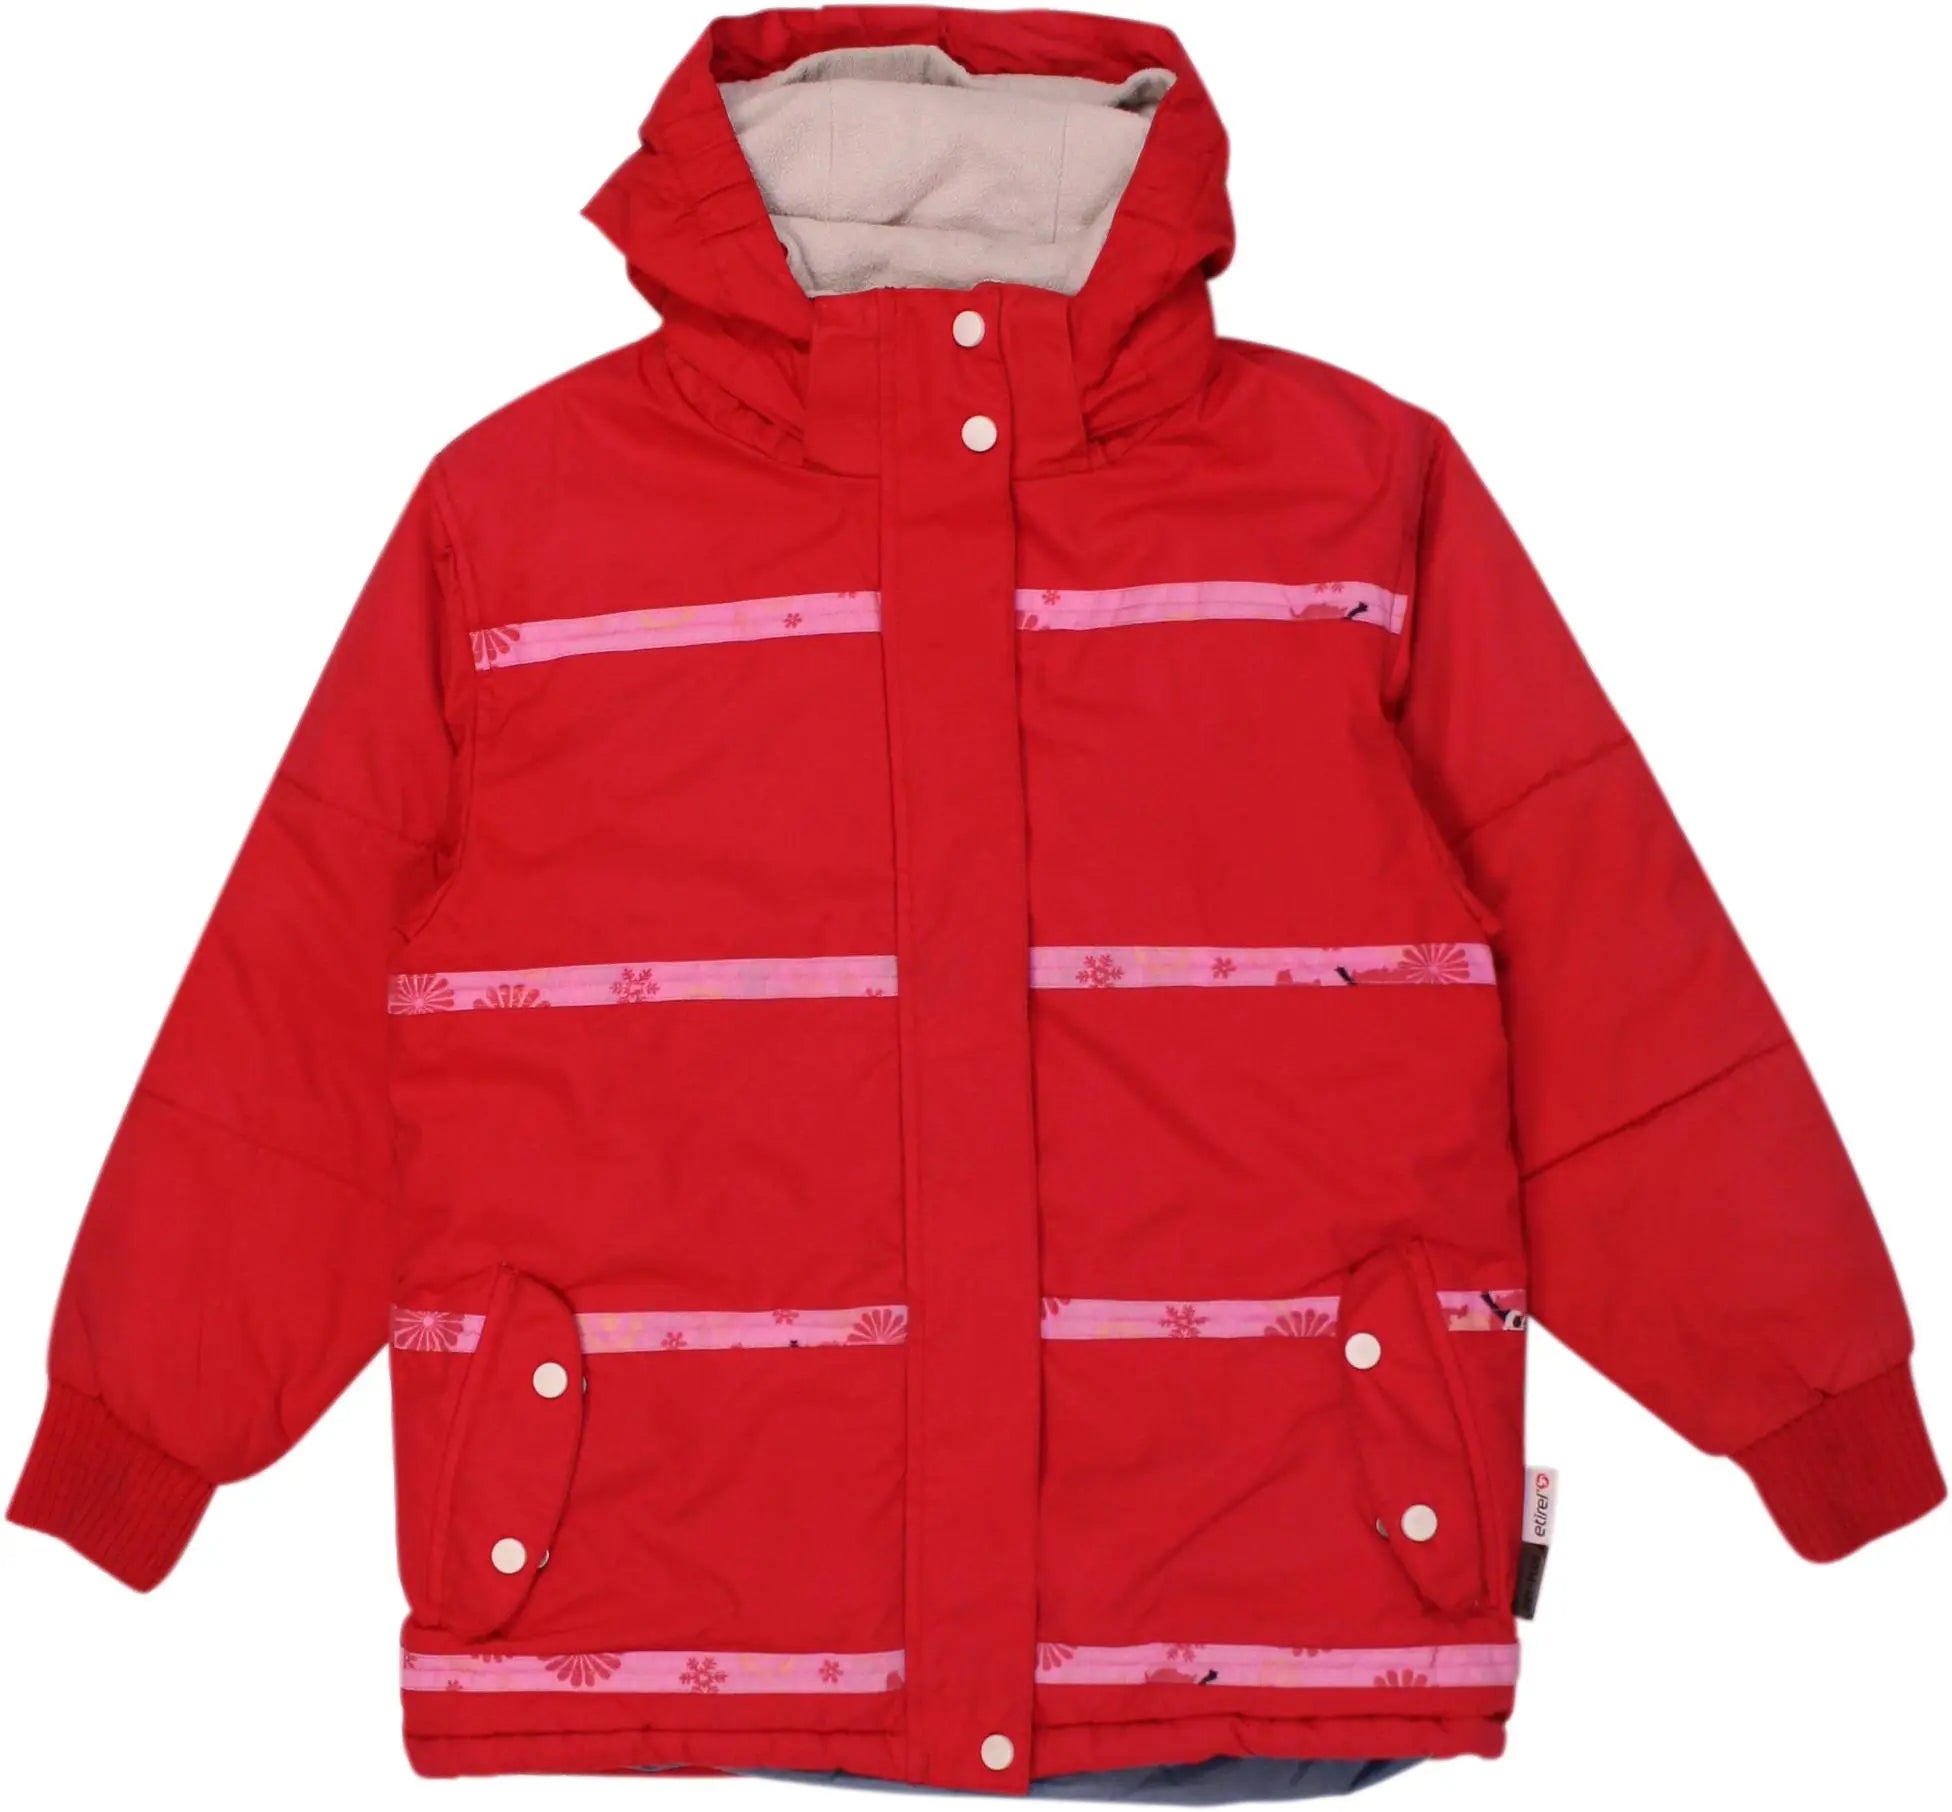 Etirel - Red Jacket by Etirel- ThriftTale.com - Vintage and second handclothing